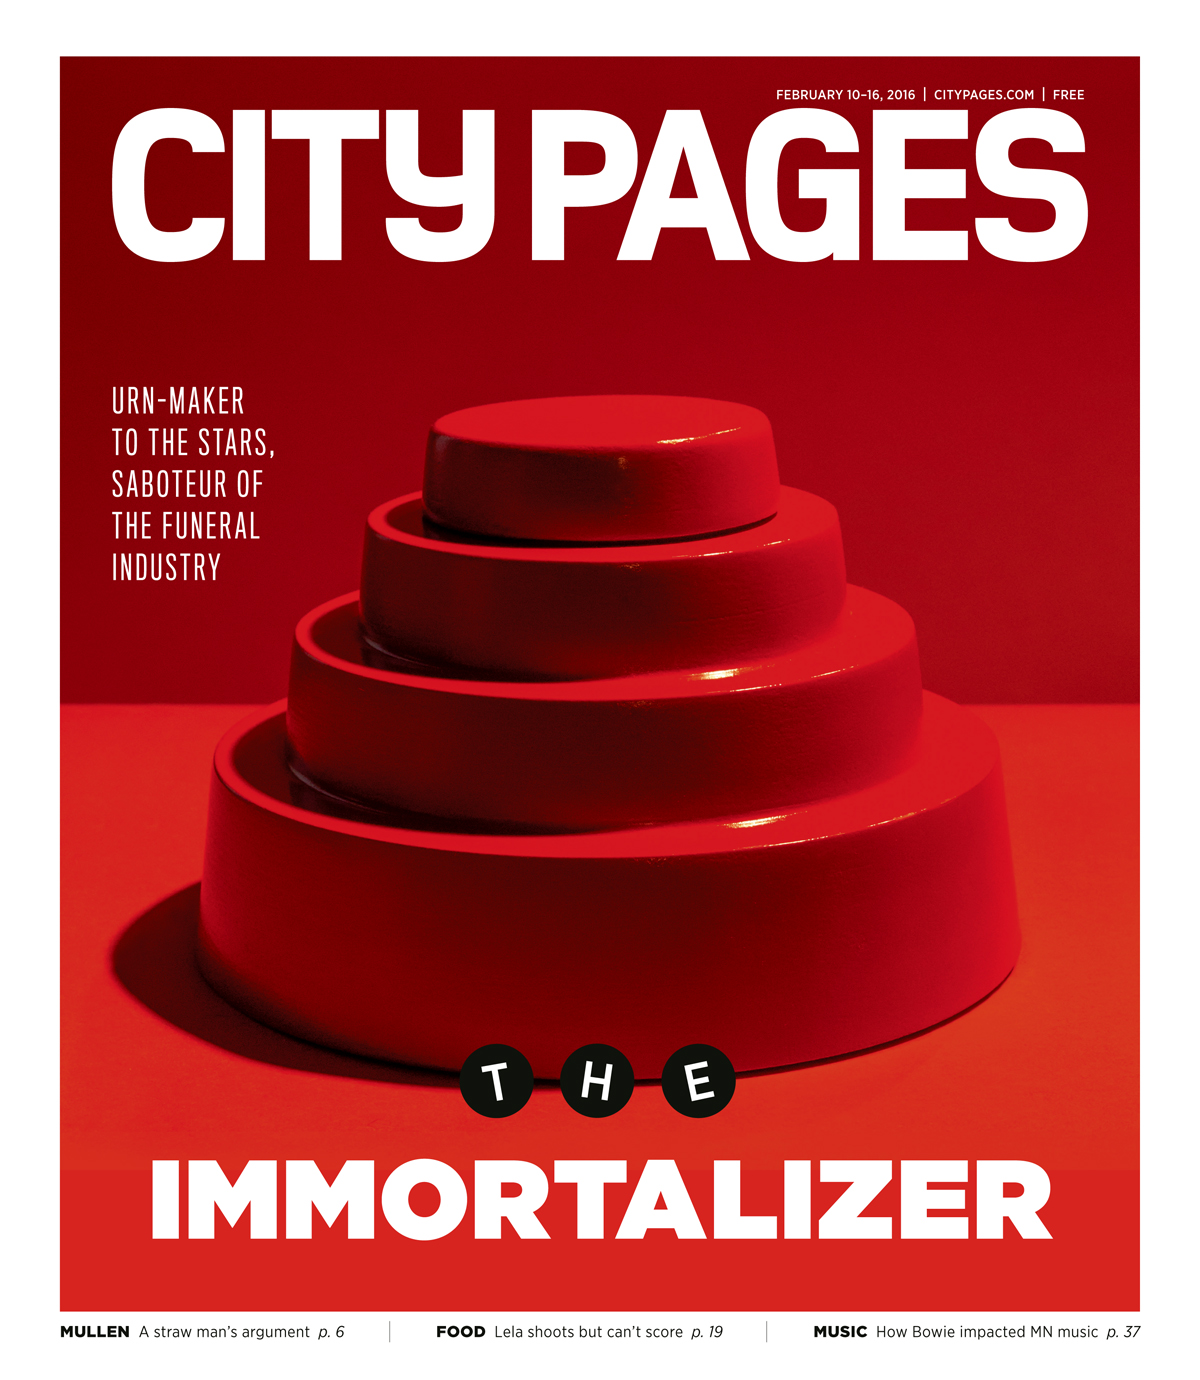 News_021016_TheImmortalizerCover_crColleenGuenther.jpg